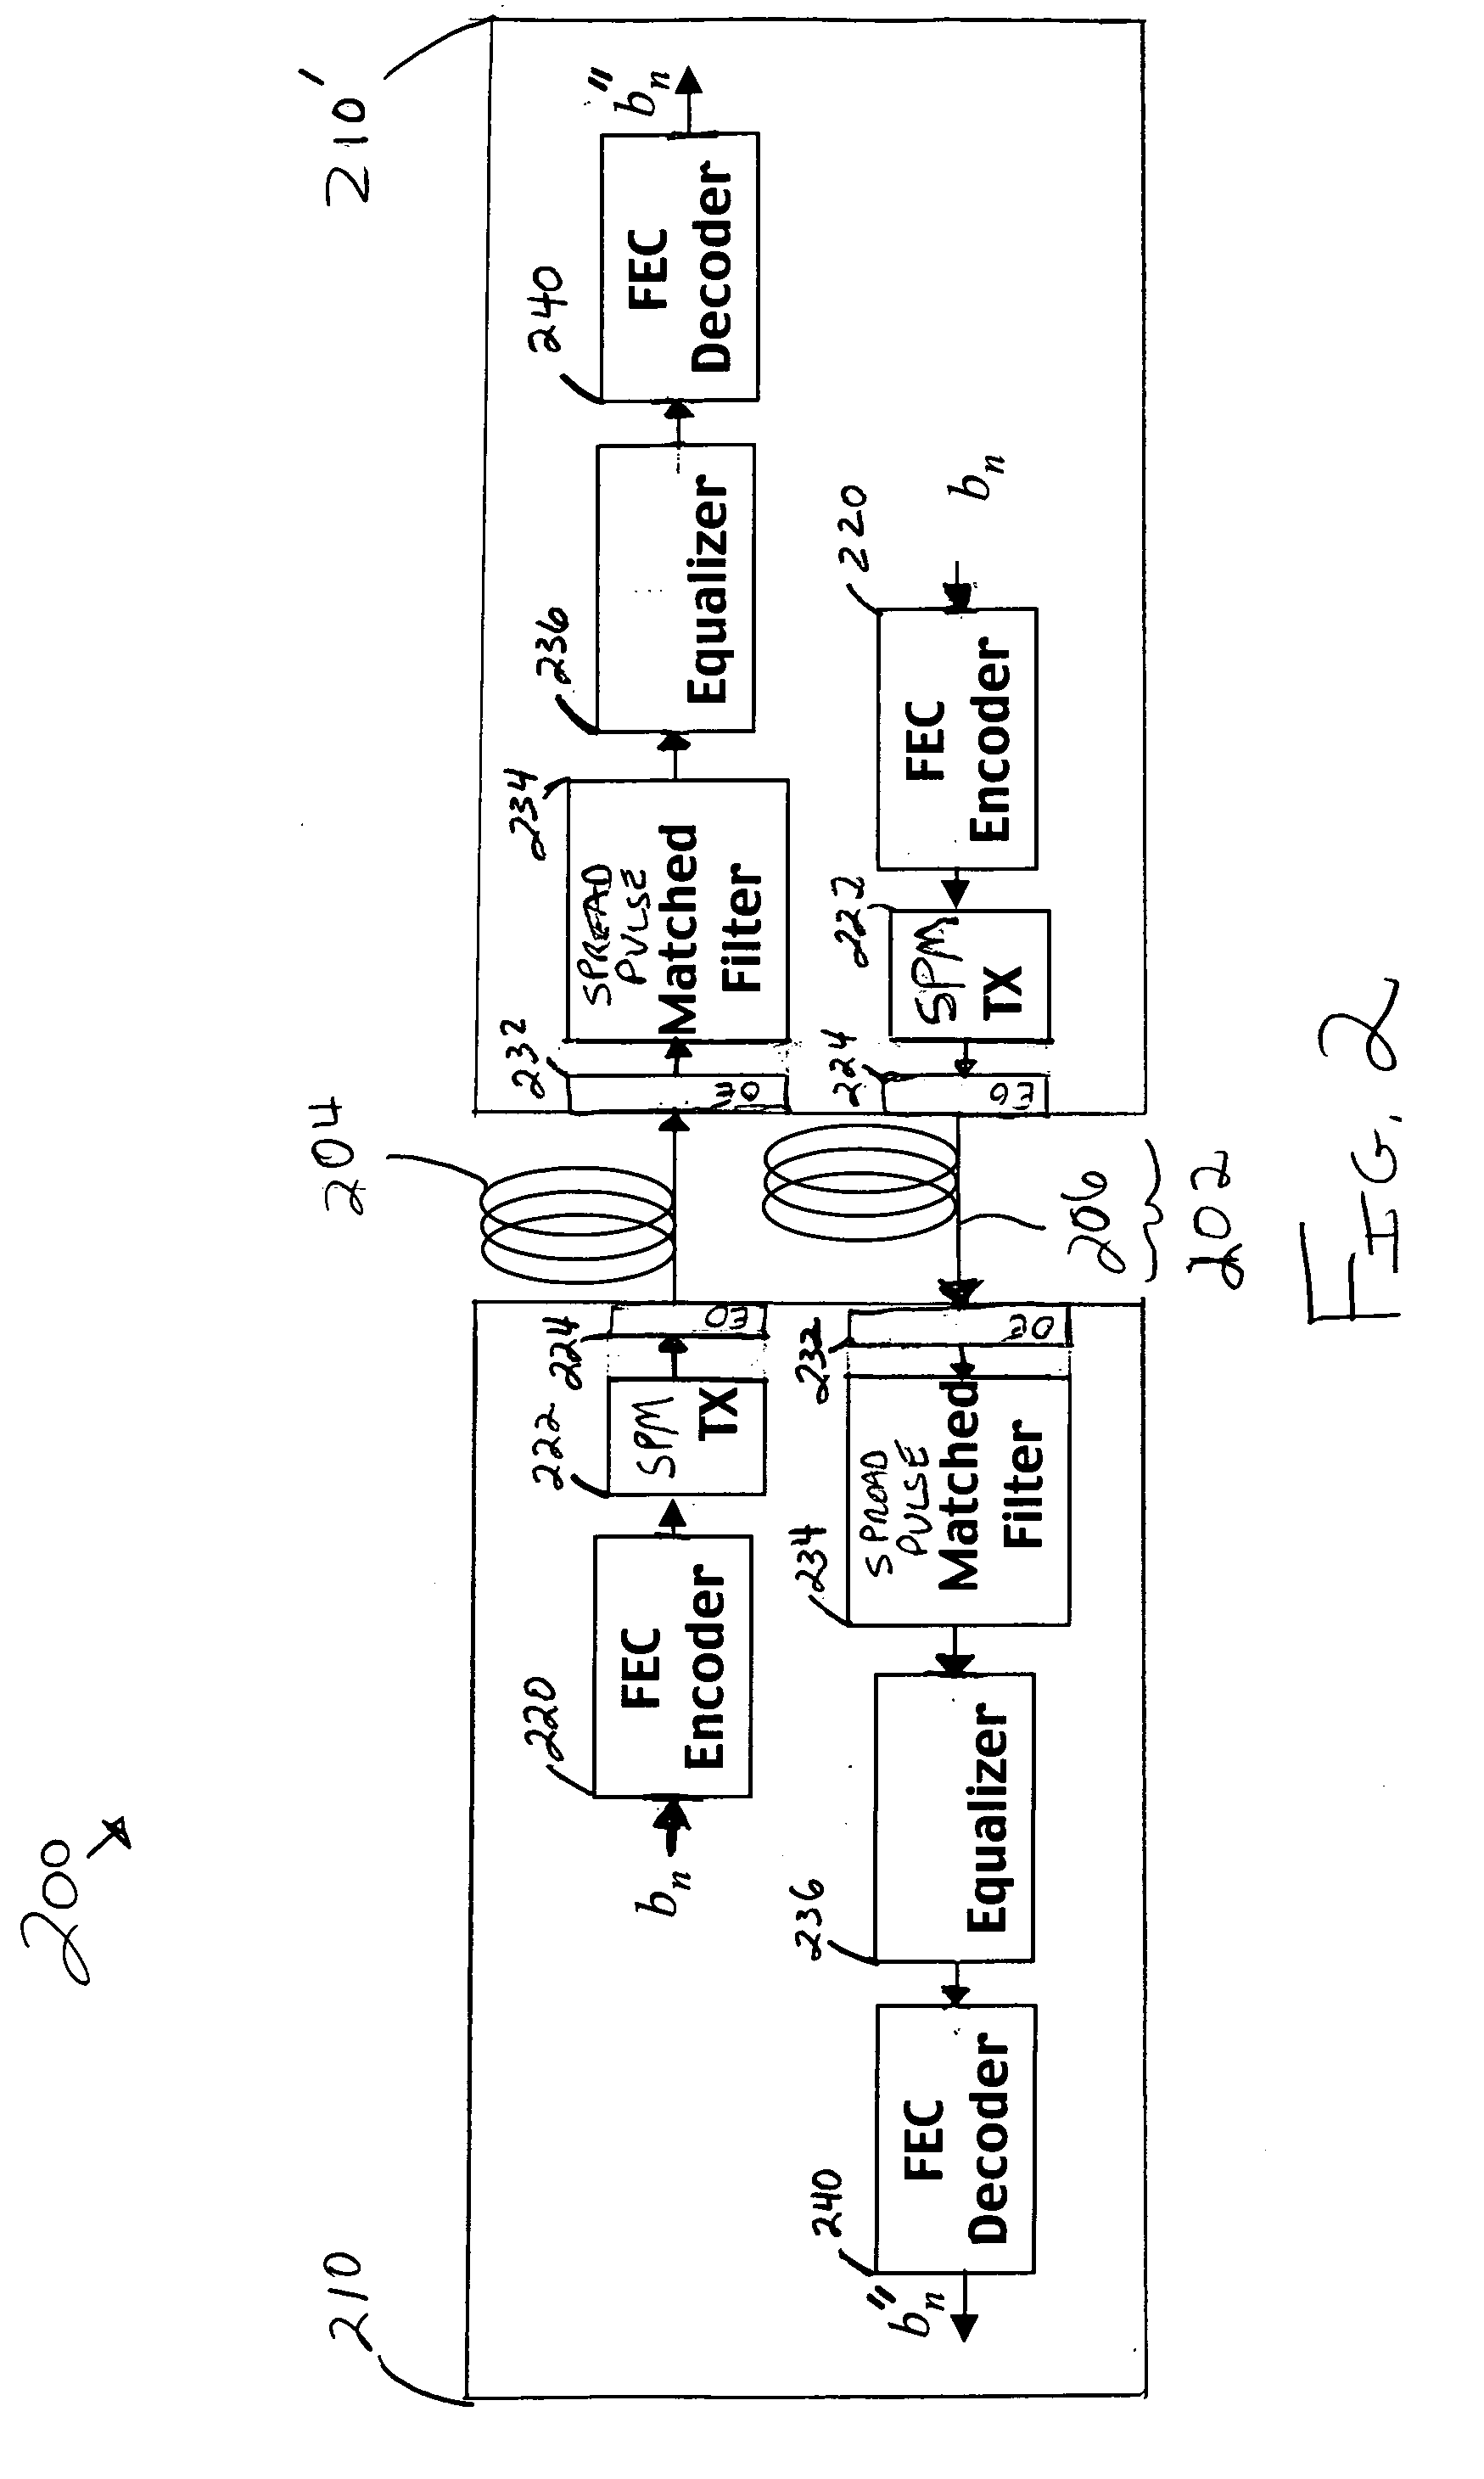 Methods of spread-pulse modulation and nonlinear time domain equalization for fiber optic communication channels